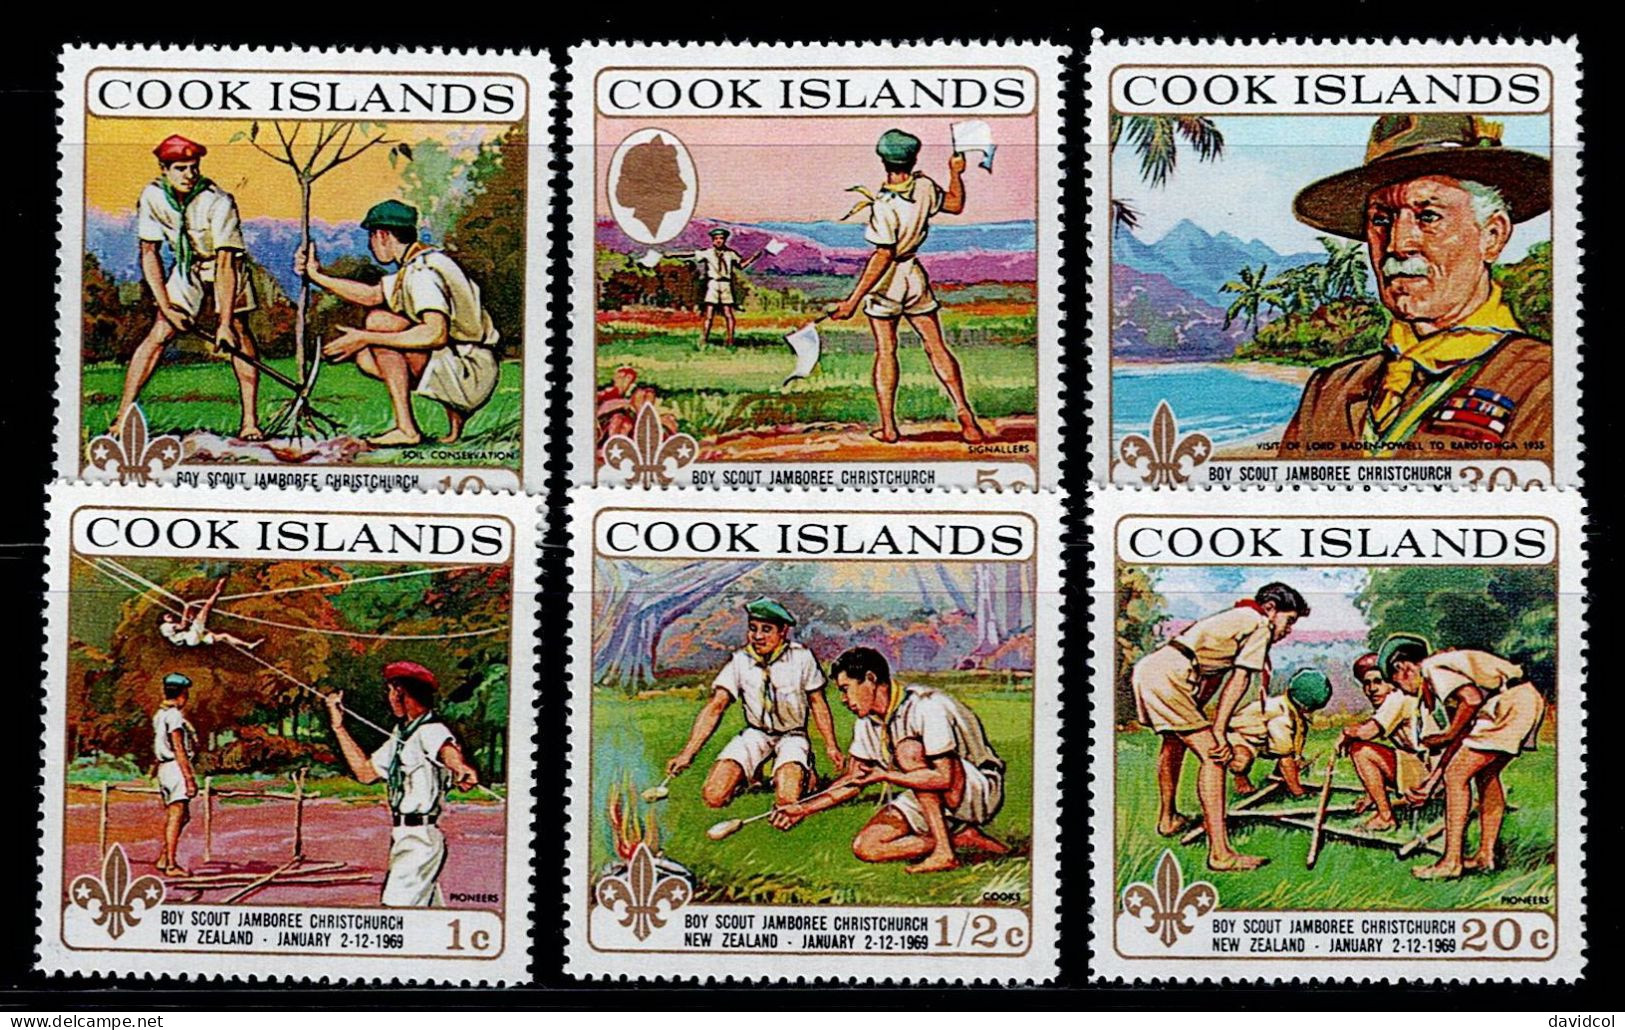 COO-01- COOK ISLANDS - 1969 - MNH -SCOUTS- SCOUT JAMBOREE NEW ZEALAND - Cook Islands